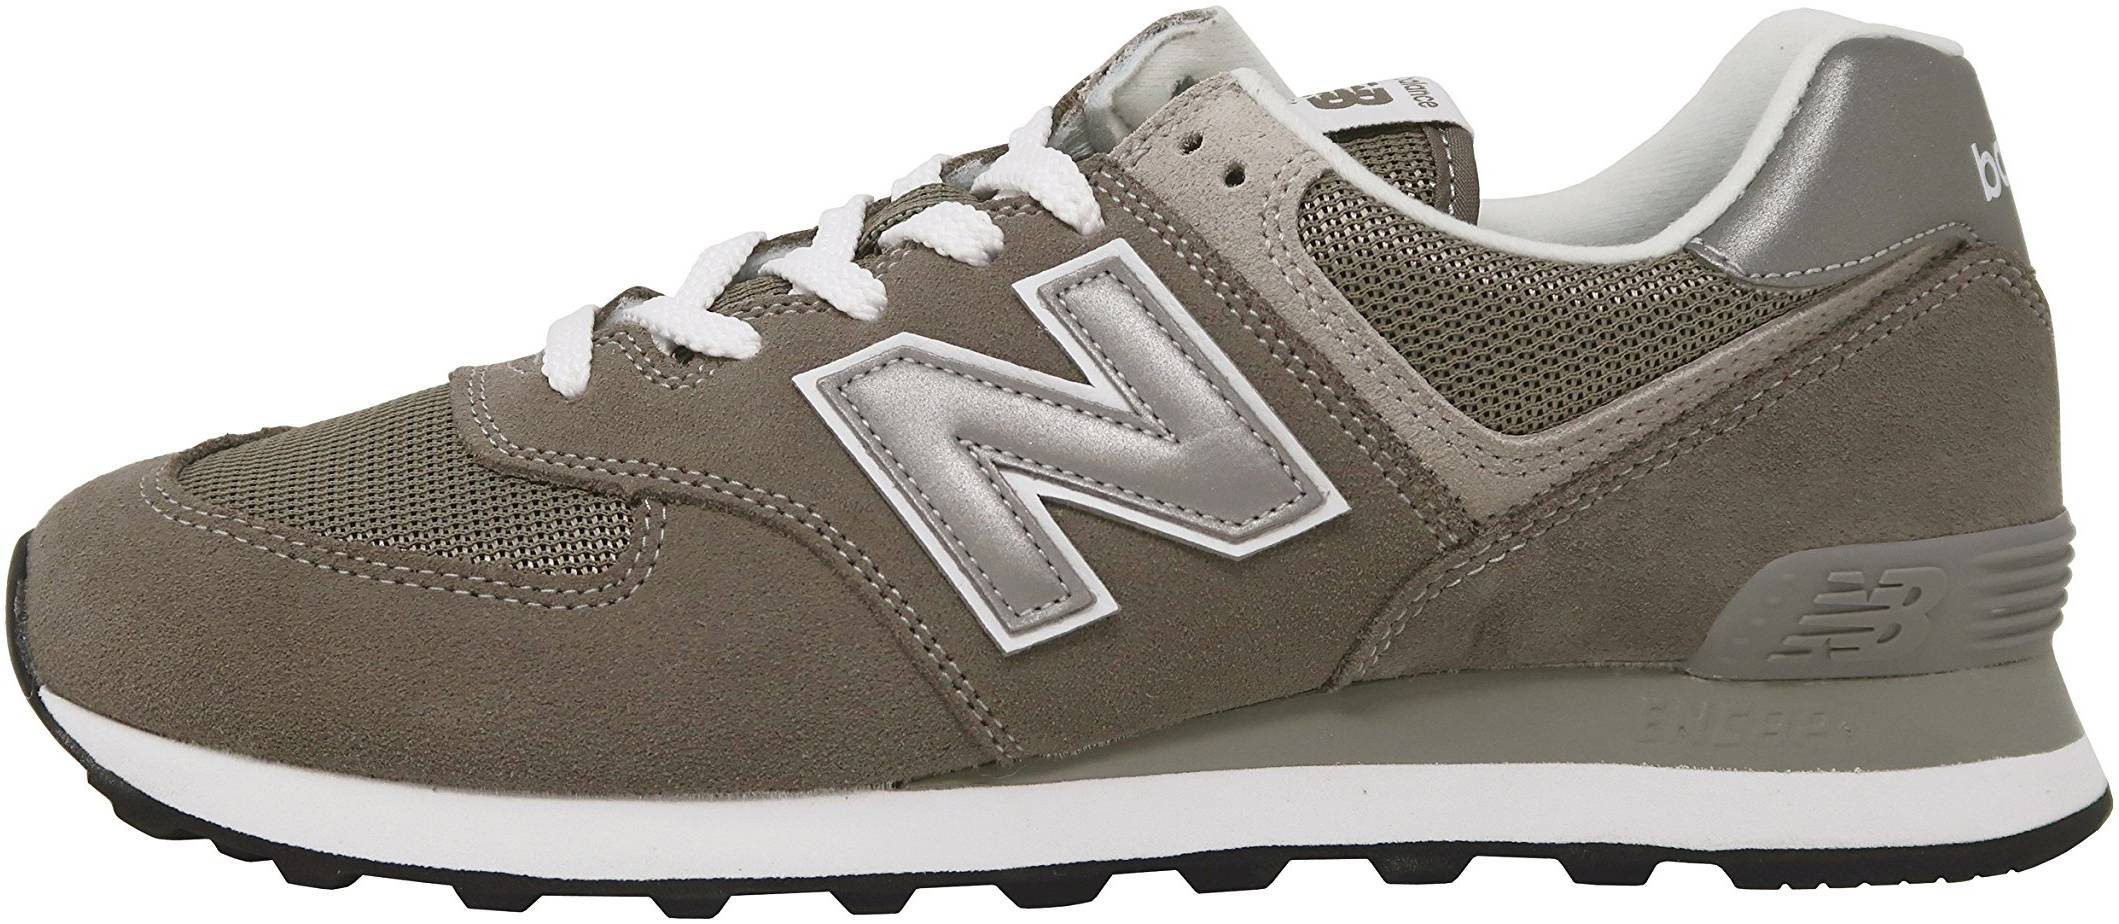 New Balance 574 sneakers in 20 colors (only $64) | RunRepeat